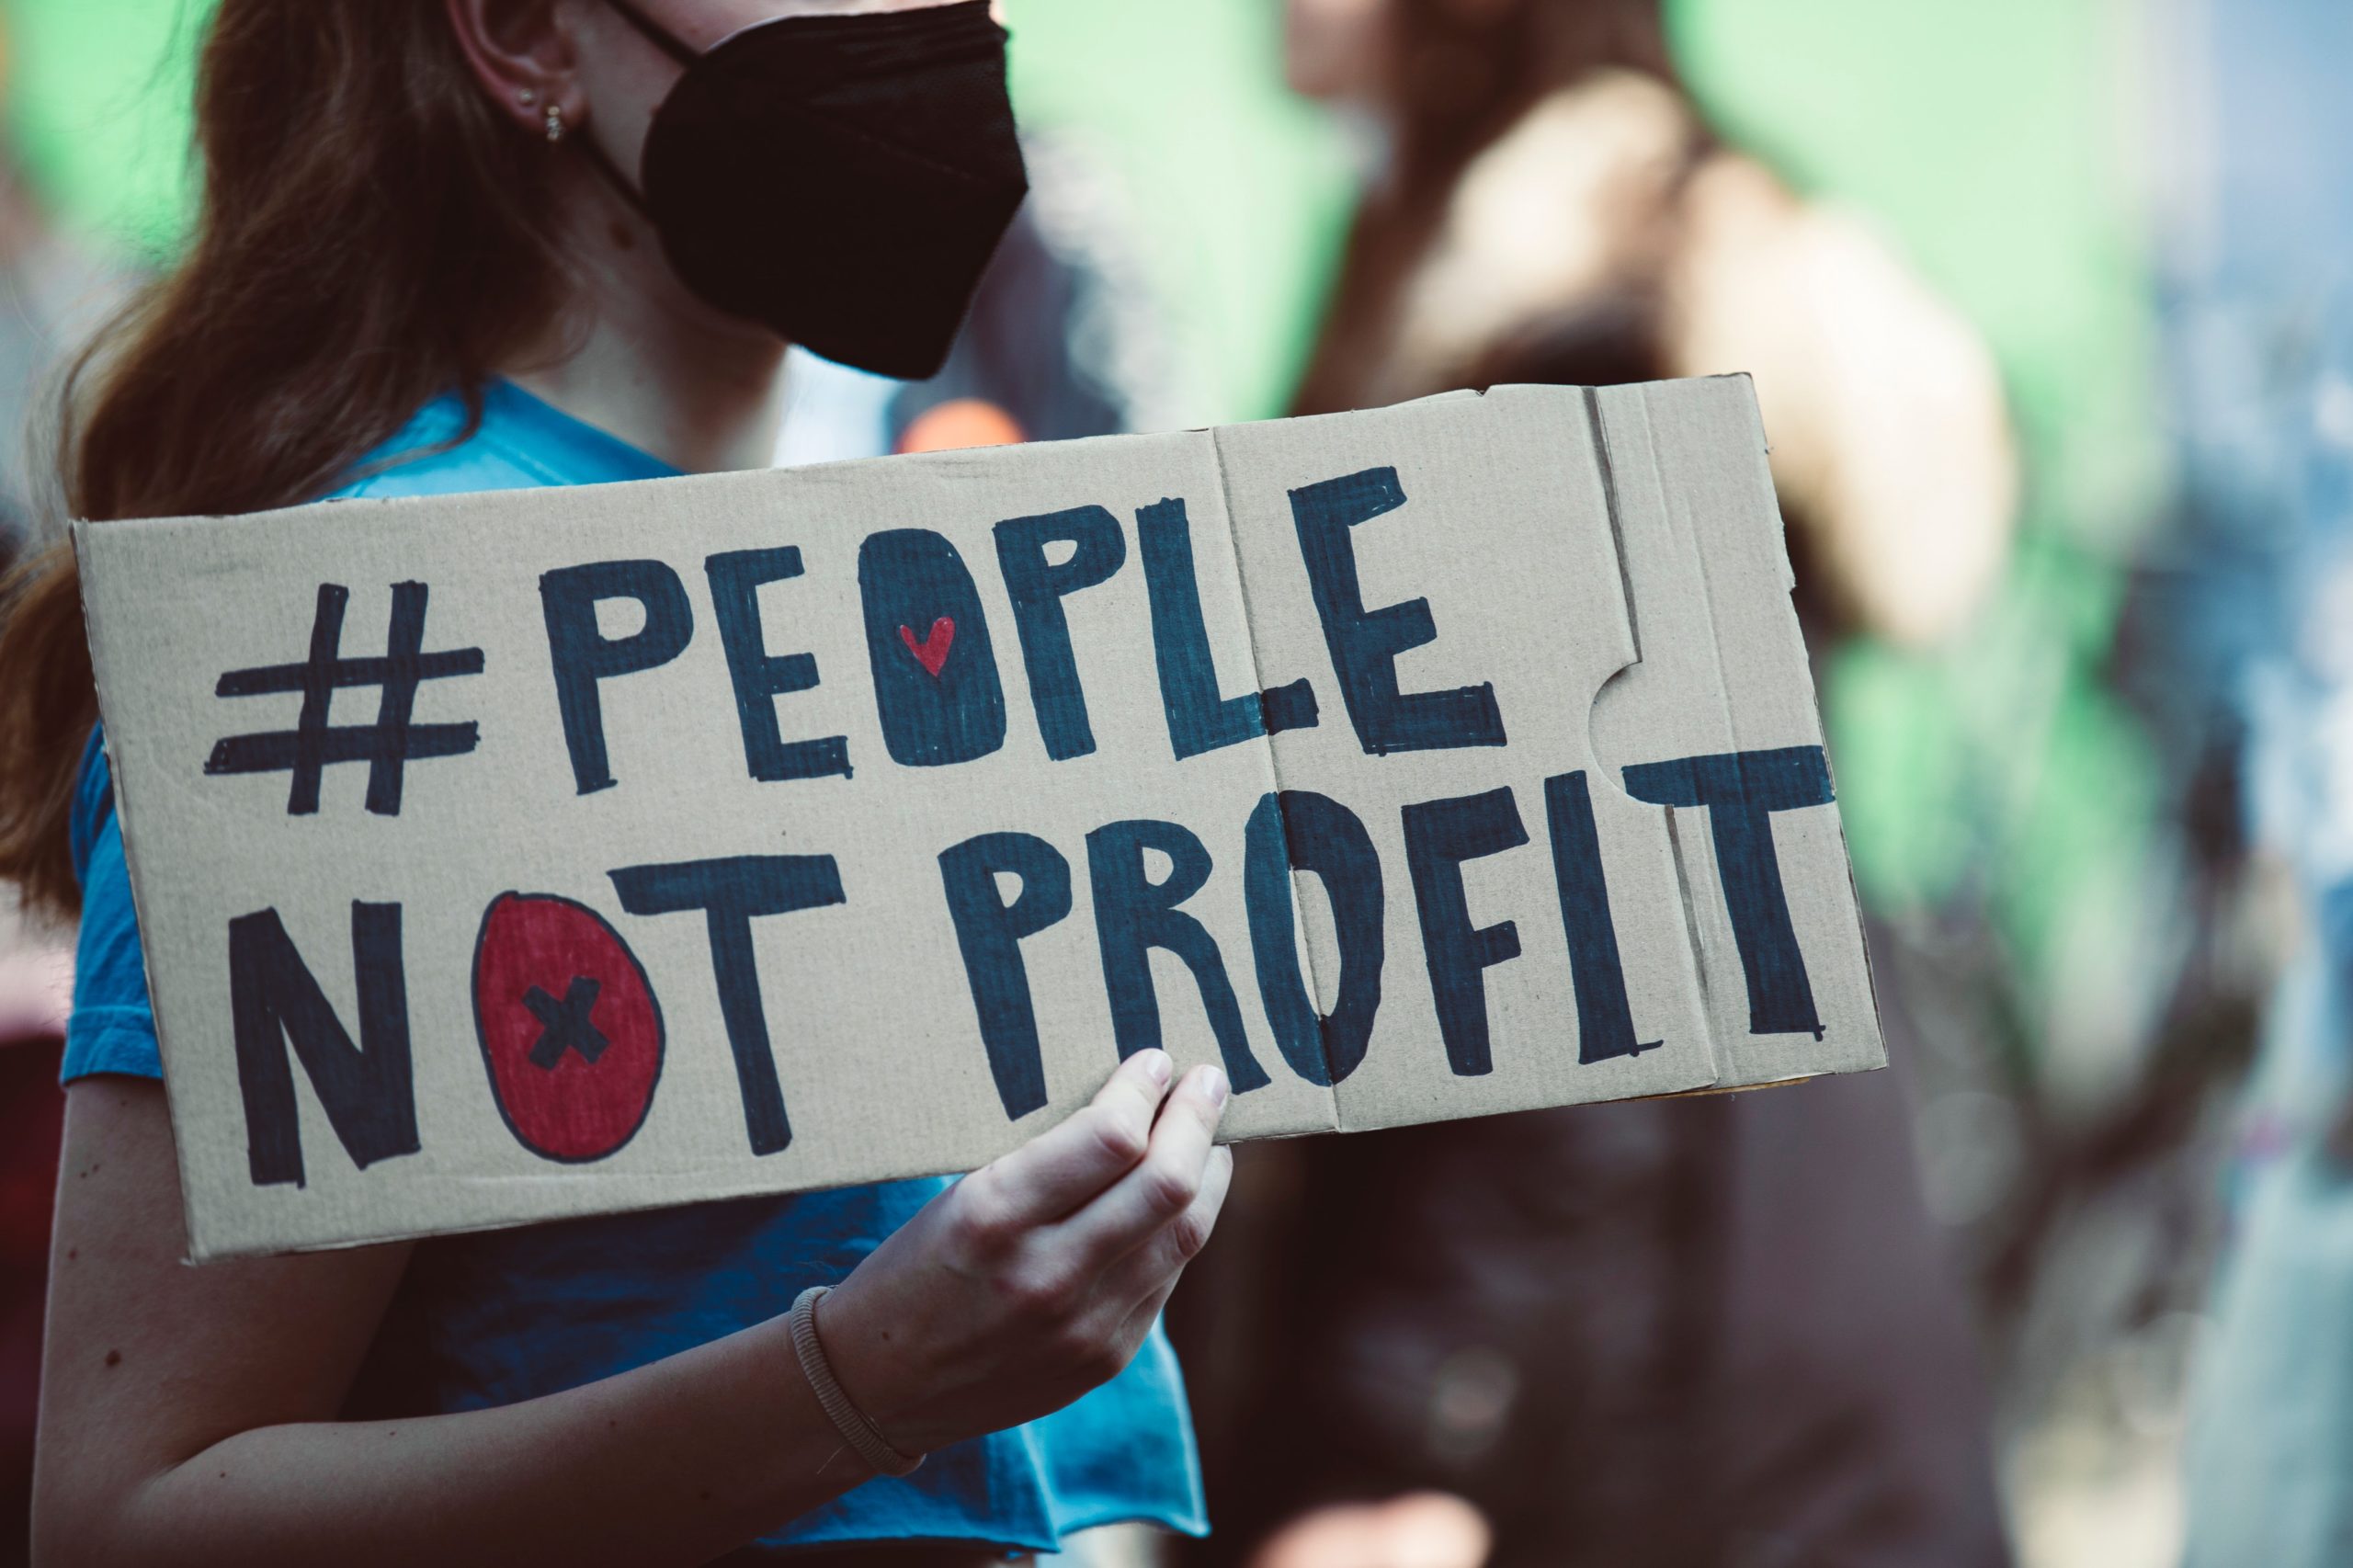 Person holding a sign written on cardboard that reads #people not profit